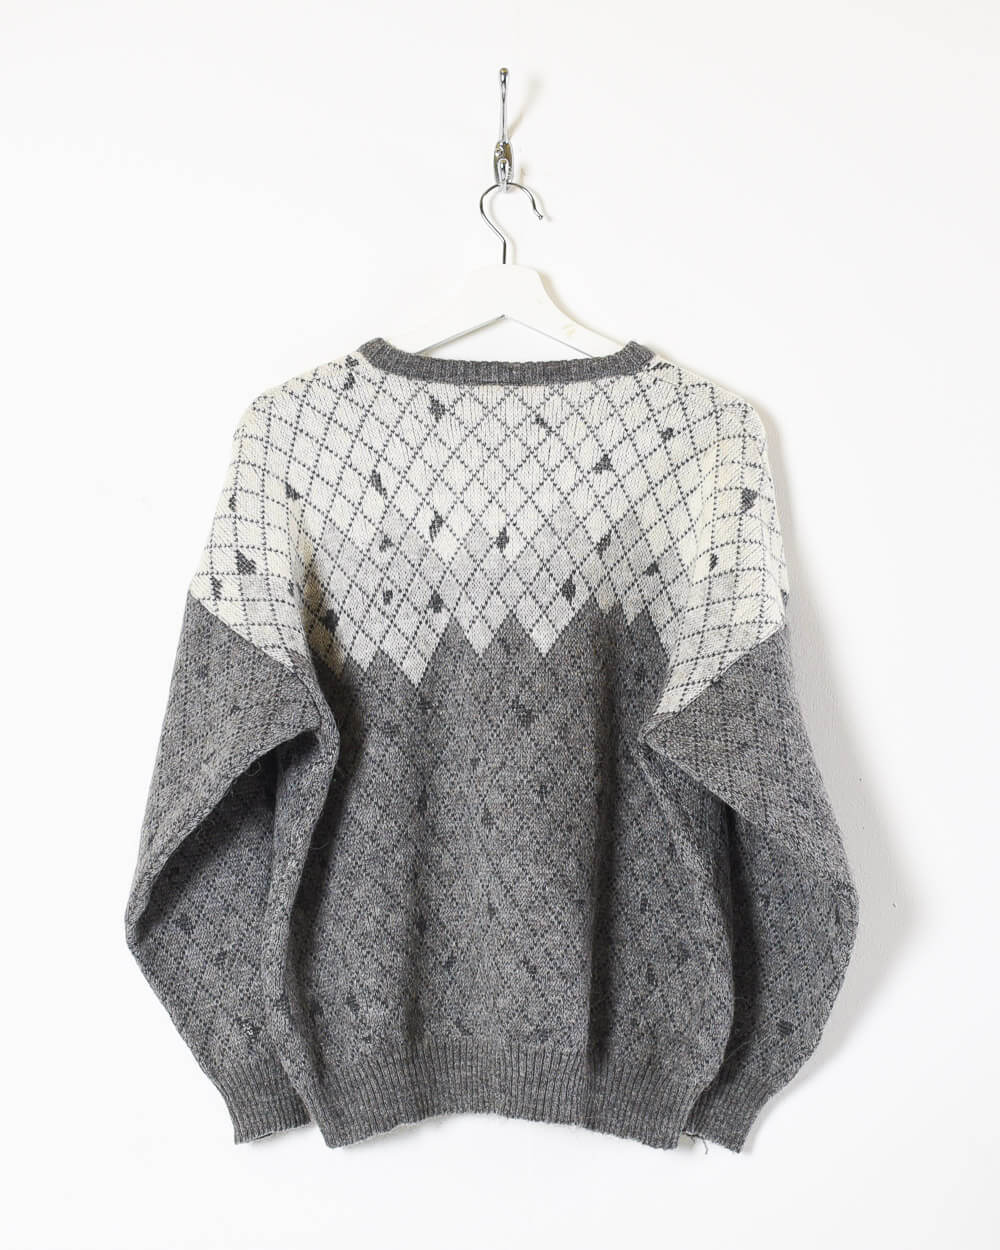 Stone Vintage 90s Knitted Sweatshirt - Small